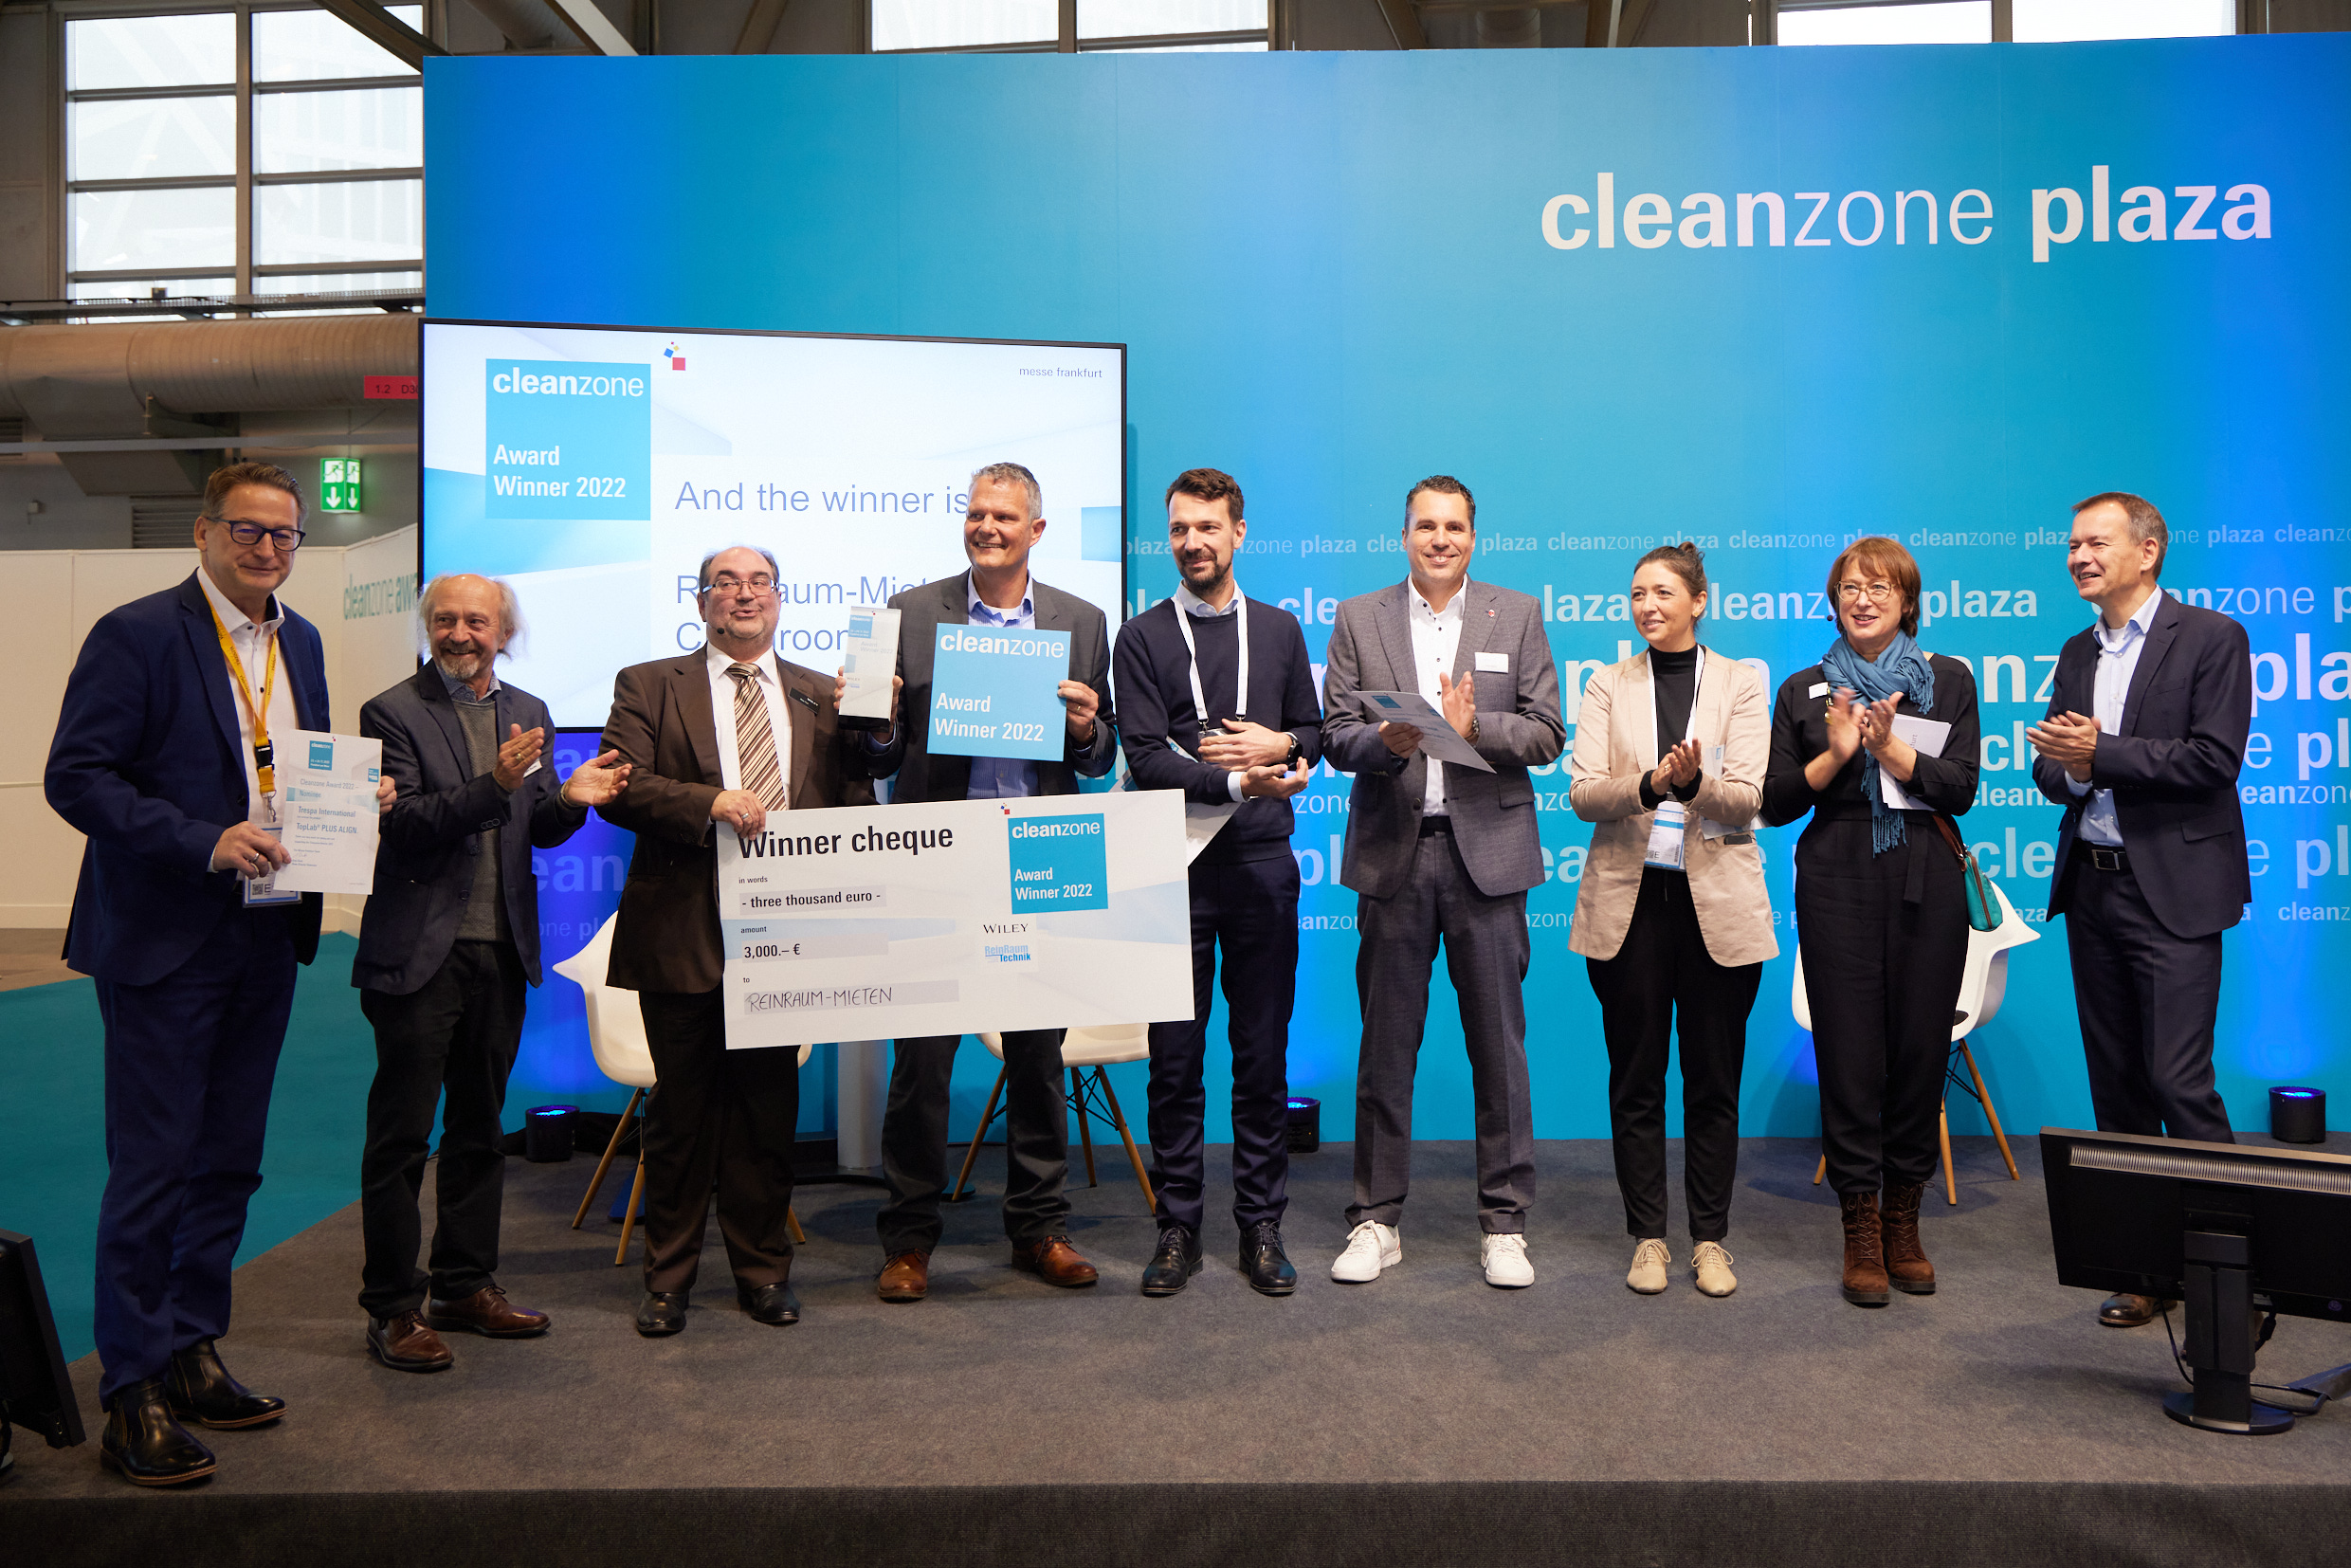 The Cleanzone Award is presented for innovative products or solutions in the cleanroom sector.